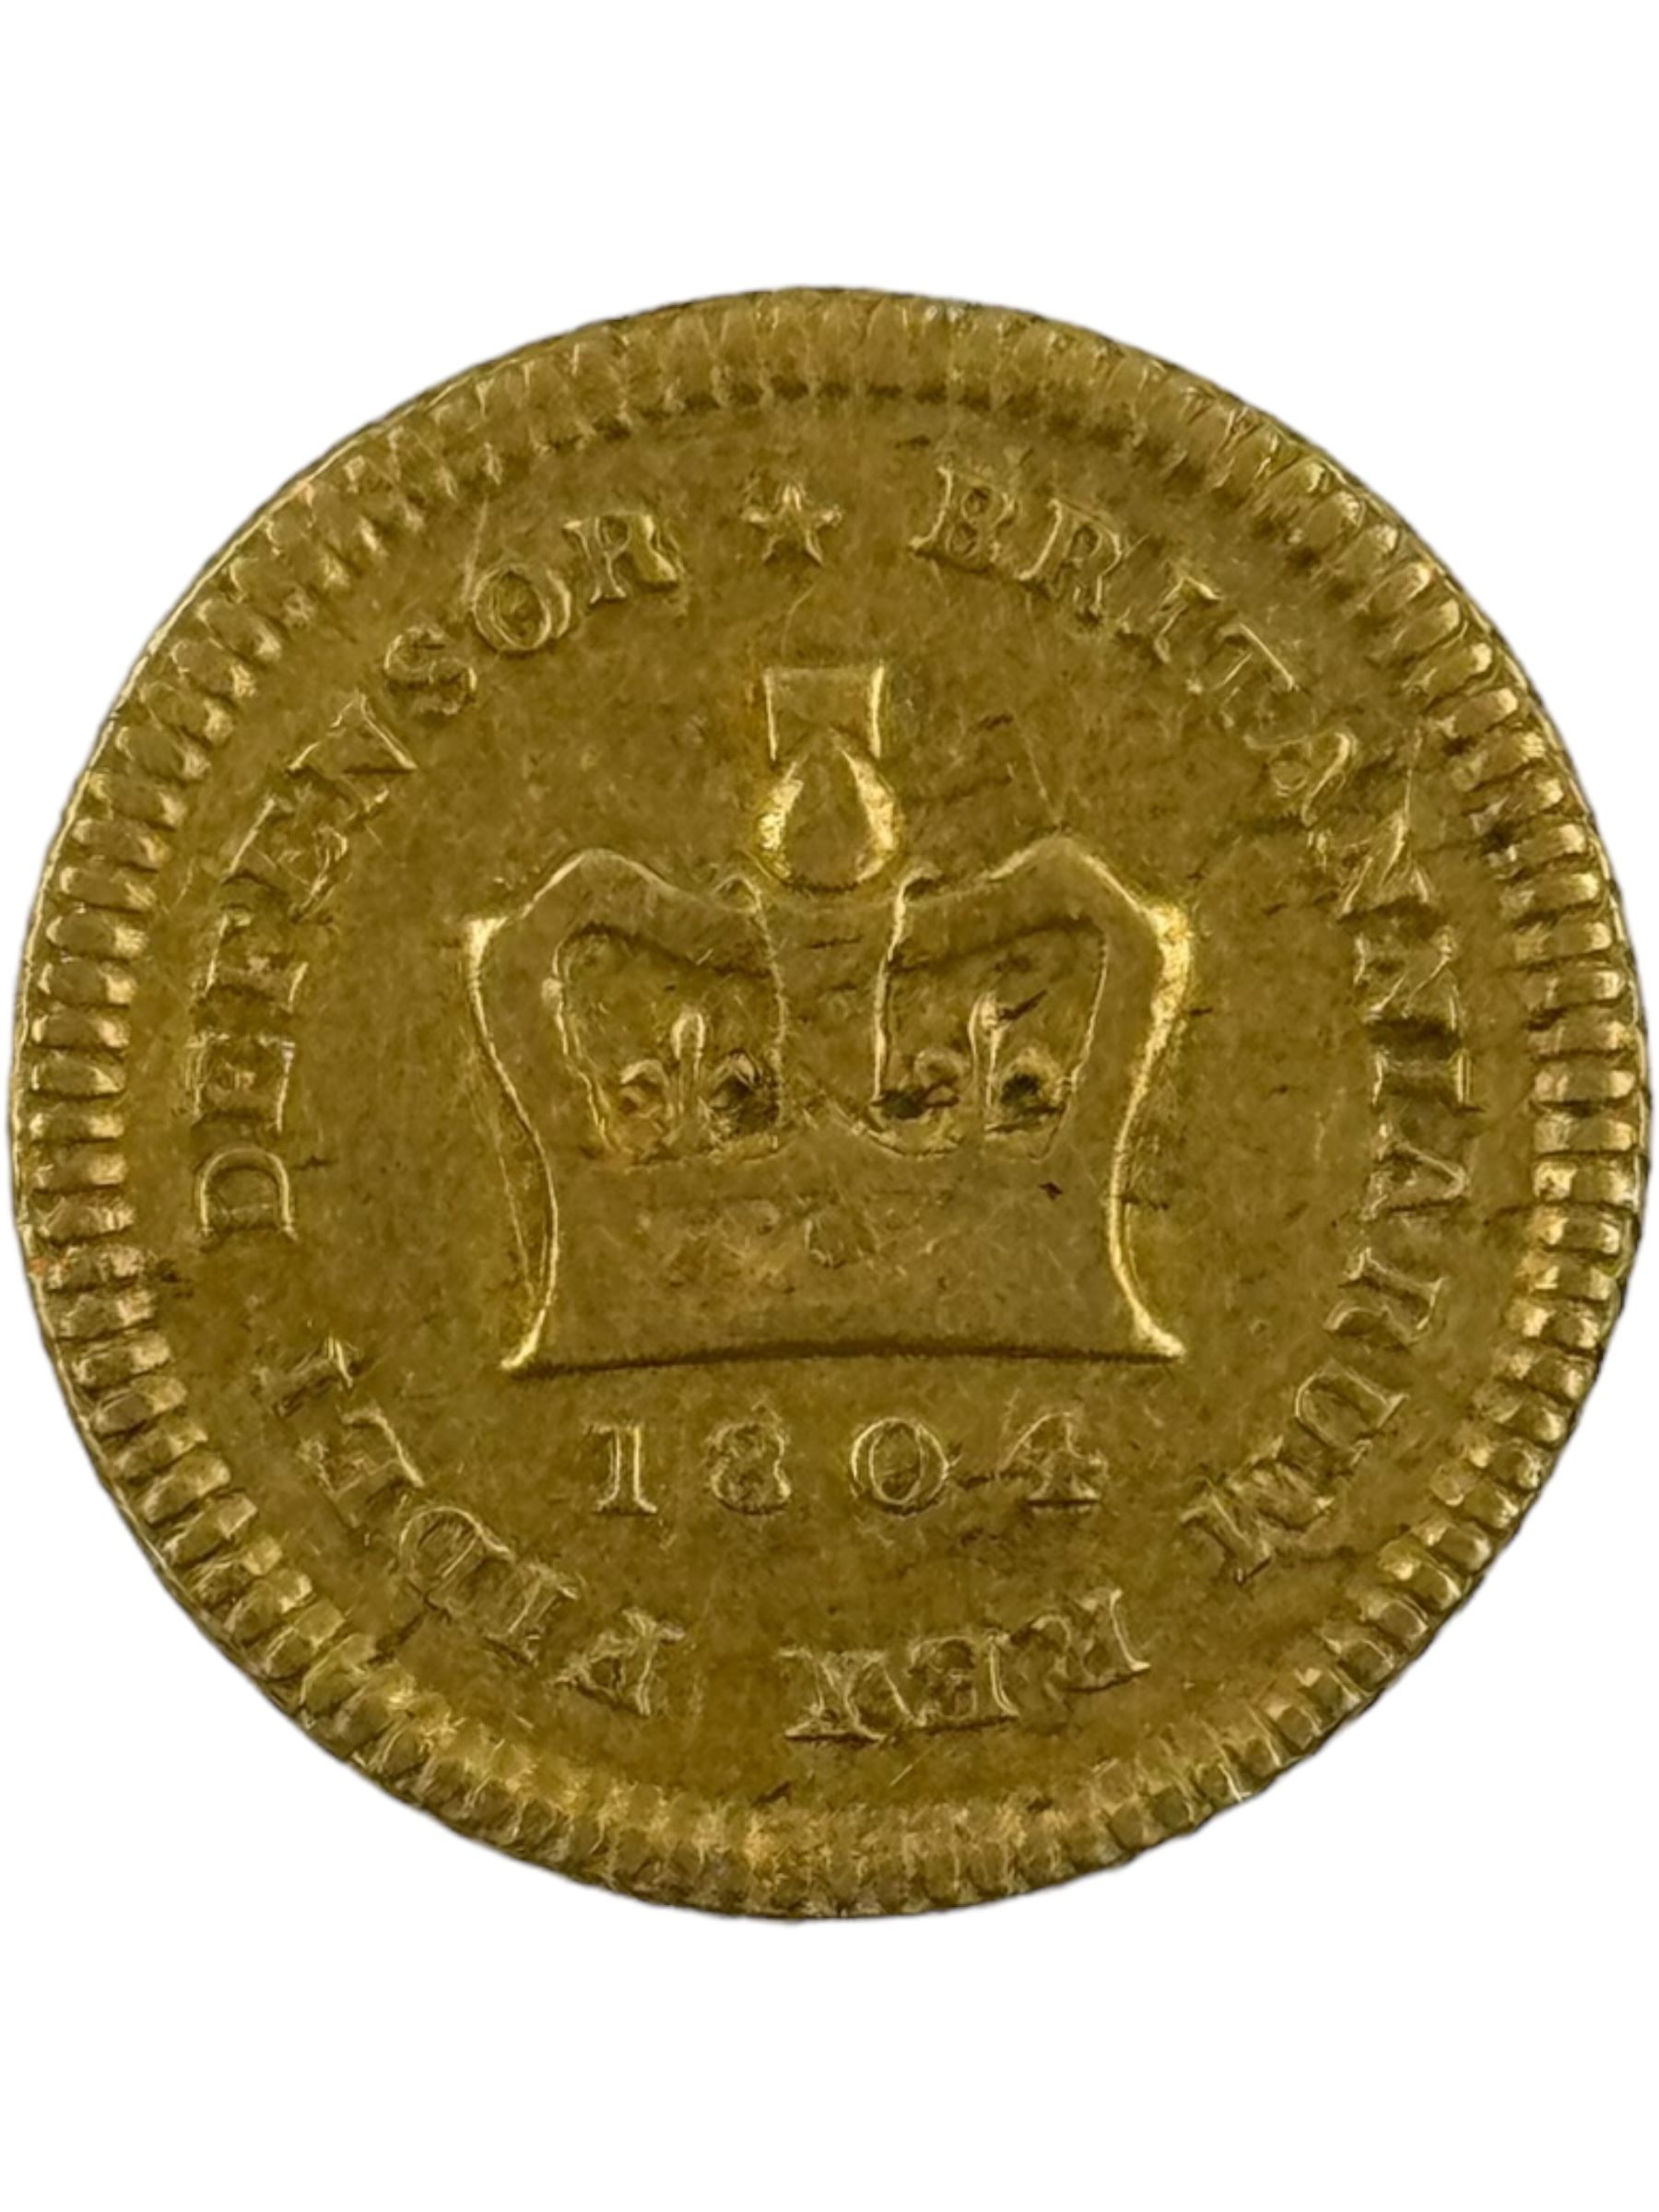 George III 1804 gold one third of a guinea coin - Image 2 of 2